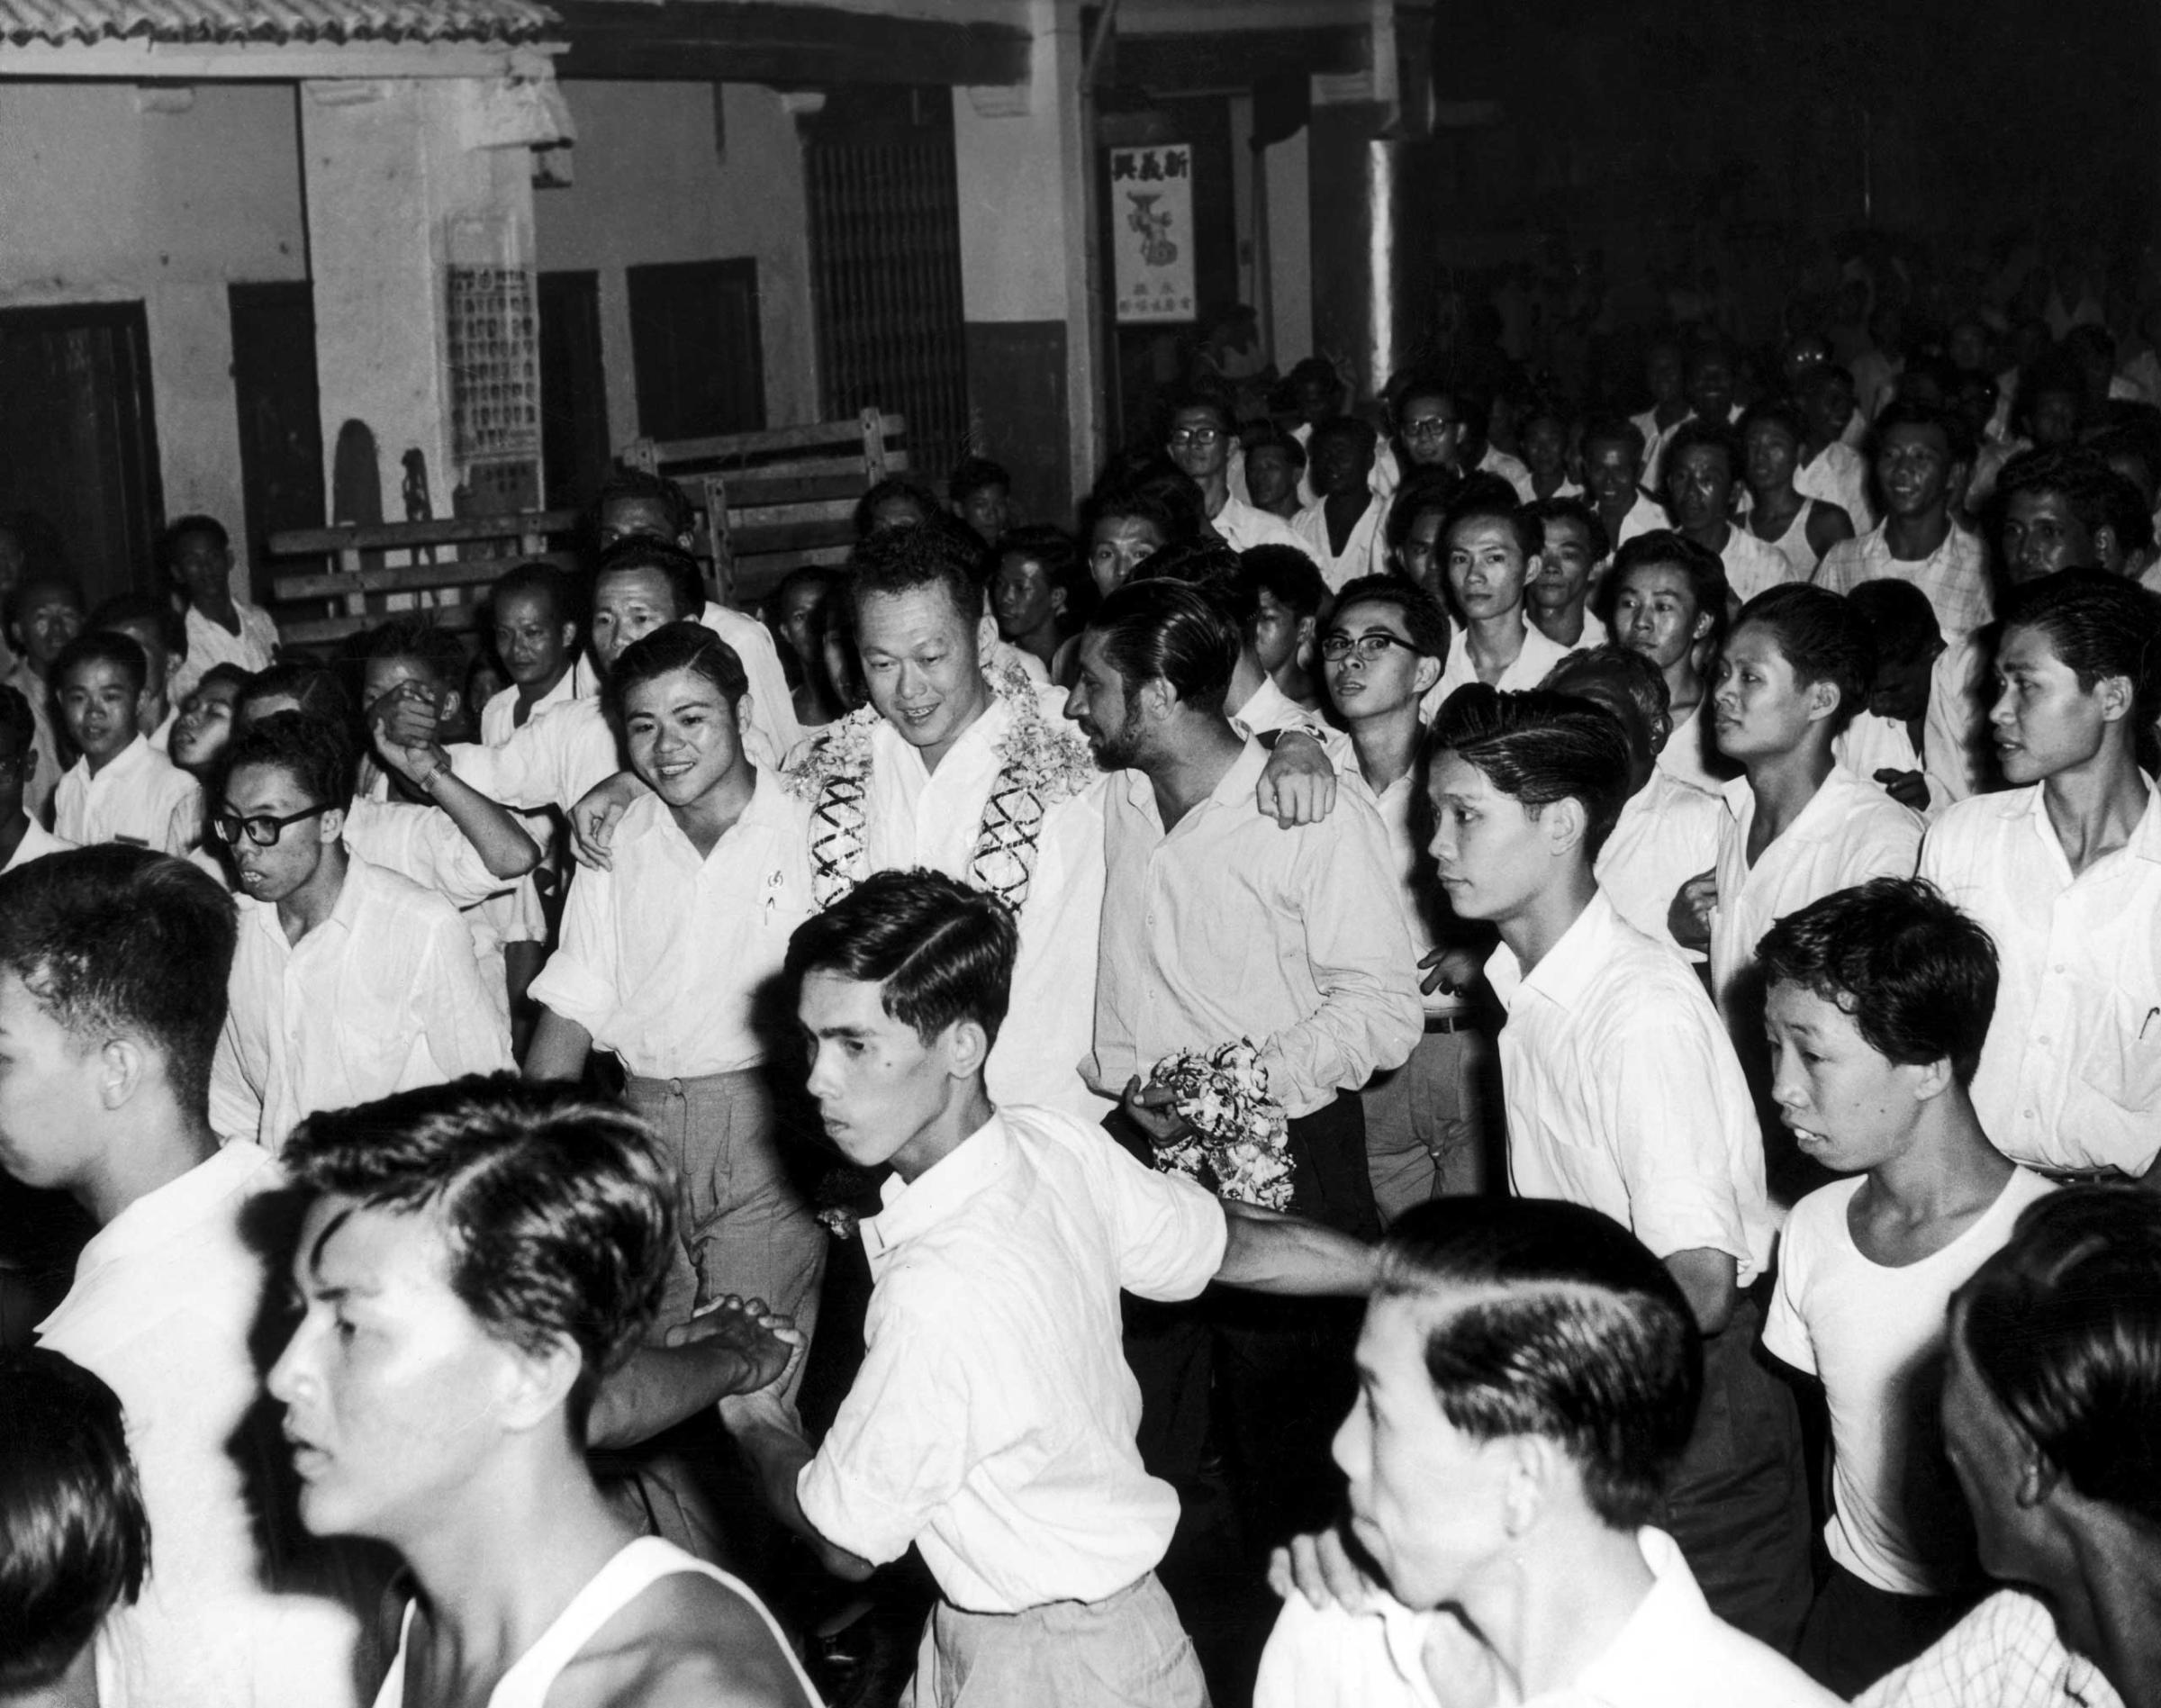 The General Secretary of People's Action Party of Singapore and the new Prime Minister Lee Kwan Yew congratulated by his supporters in 1959.